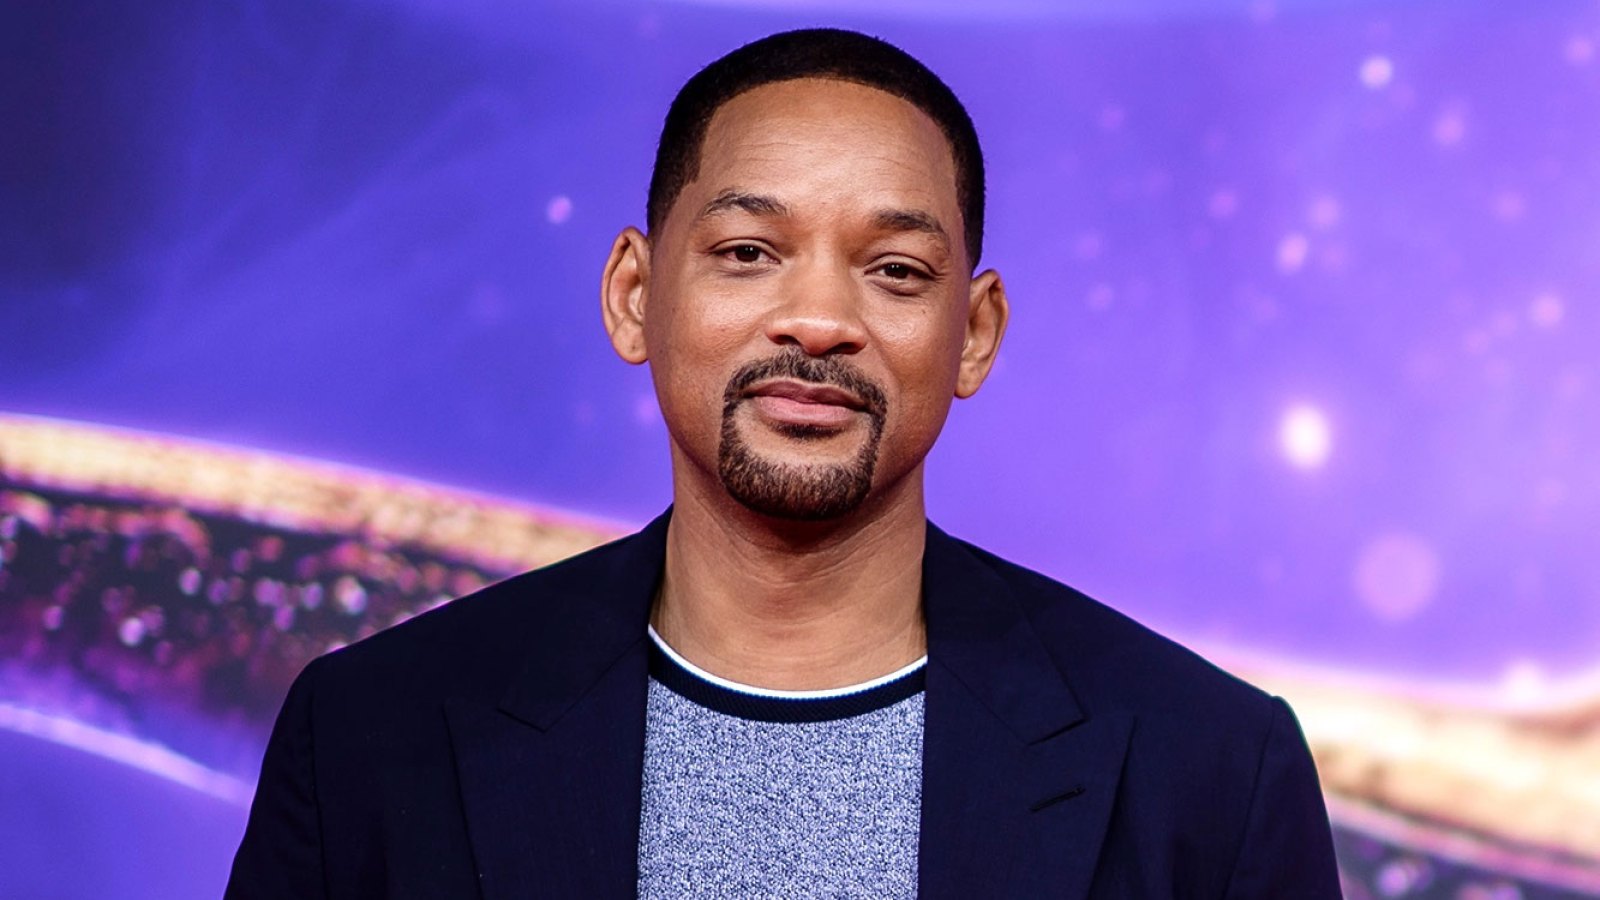 Tony Awards Producers Remind Attendees of Strict No Violence Policy After Will Smith Oscars Slap